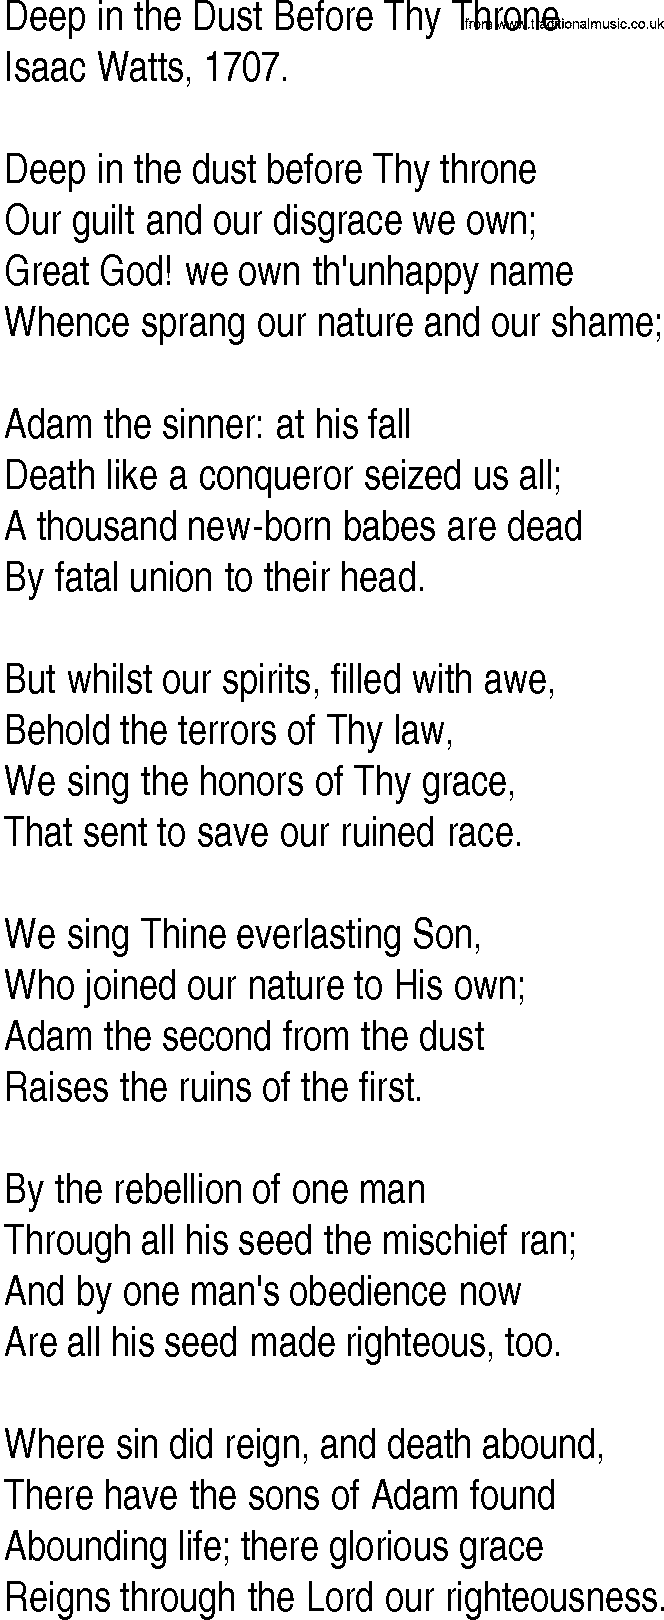 Hymn and Gospel Song: Deep in the Dust Before Thy Throne by Isaac Watts lyrics